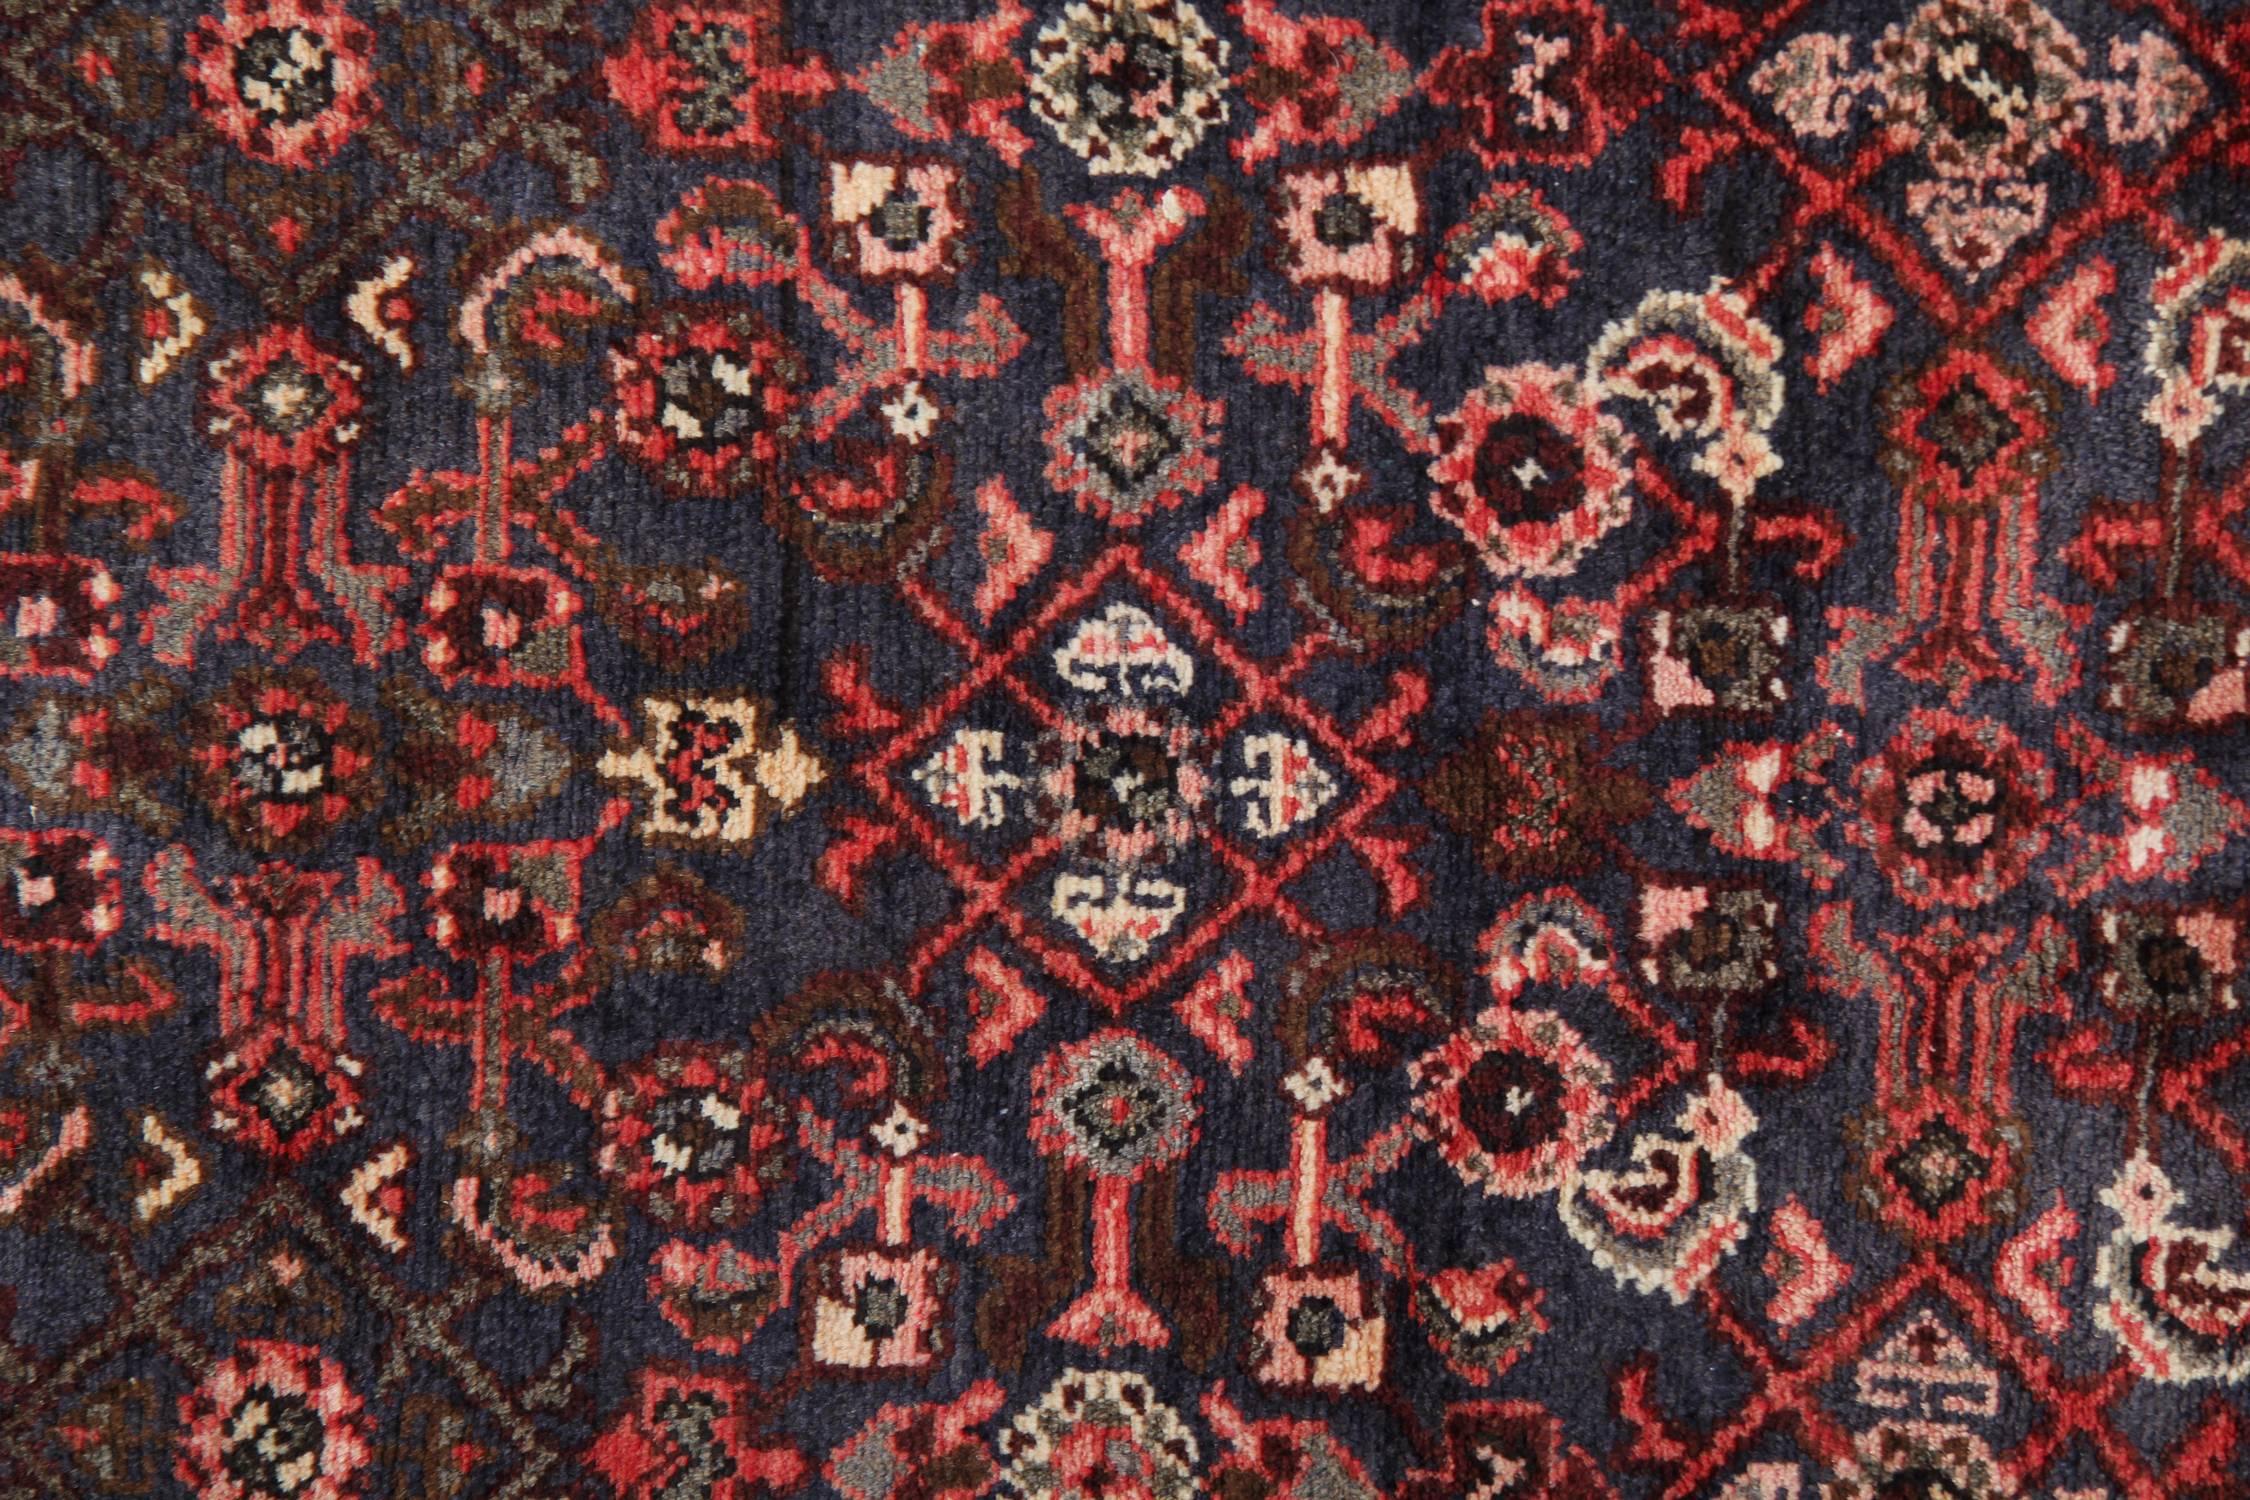 Tribal motifs have been intricately woven into this fine wool rug, constructed in the 1950s. This piece features a highly decorative central design and the border with a dark blue background and contrasting red, beige and cream accent colours. 
The